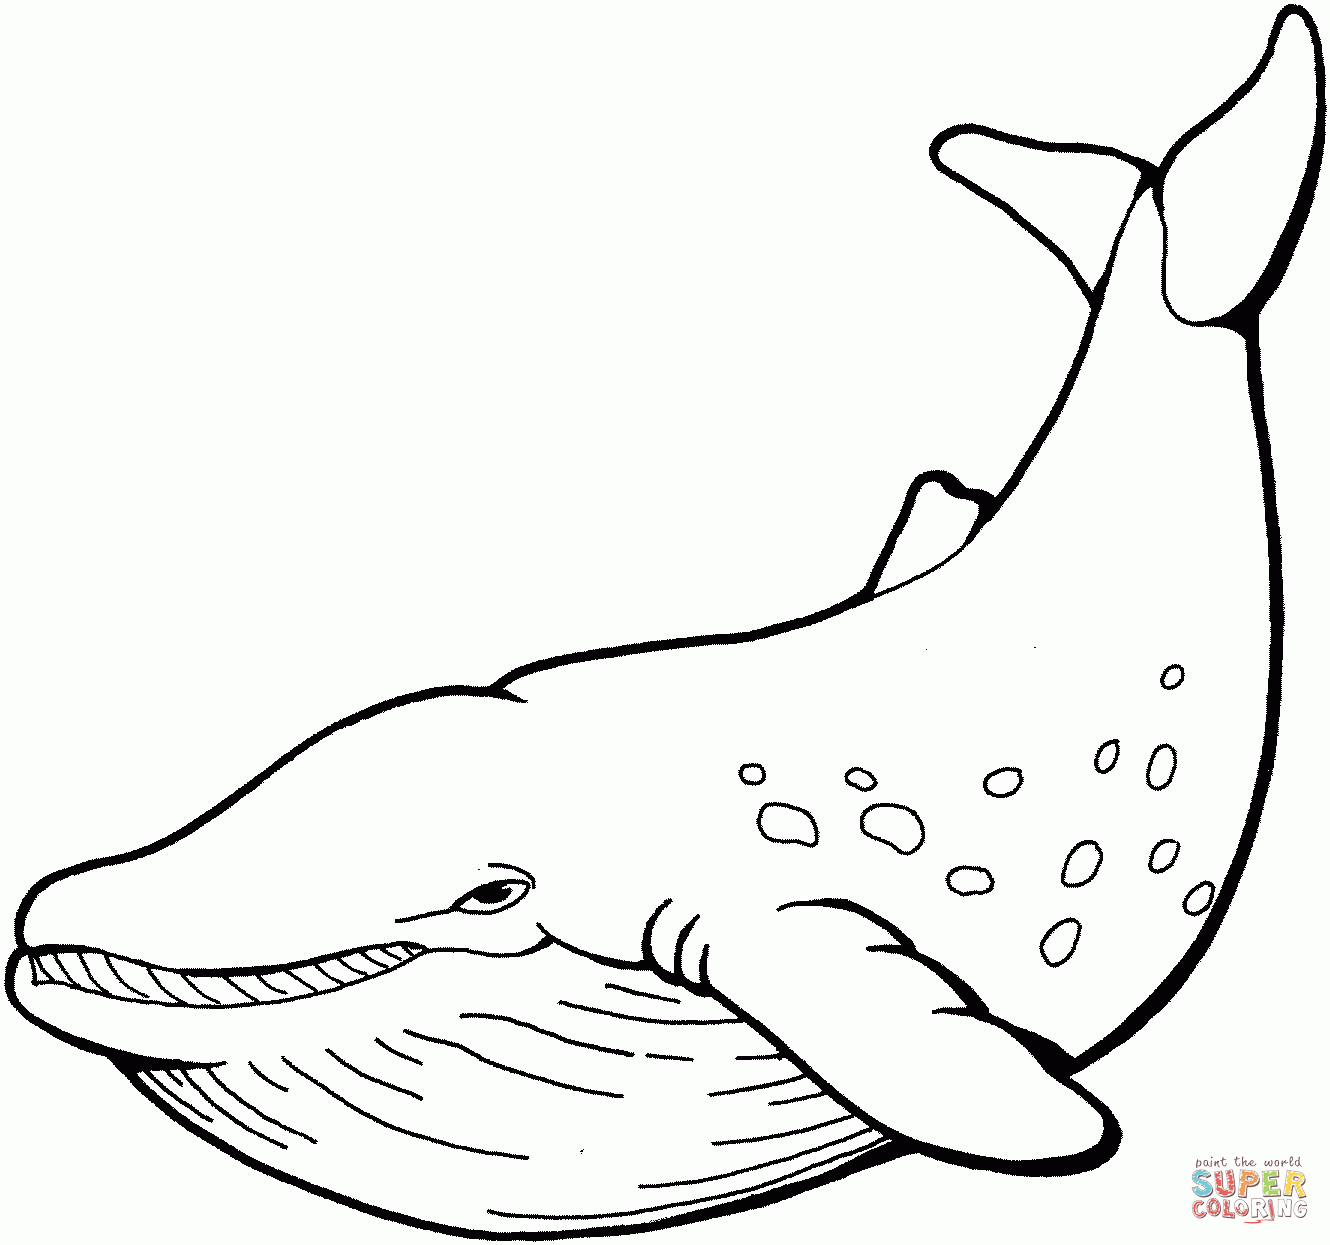 Whale Coloring Page | Free Printable Coloring Pages - Free Printable Whale Coloring Pages